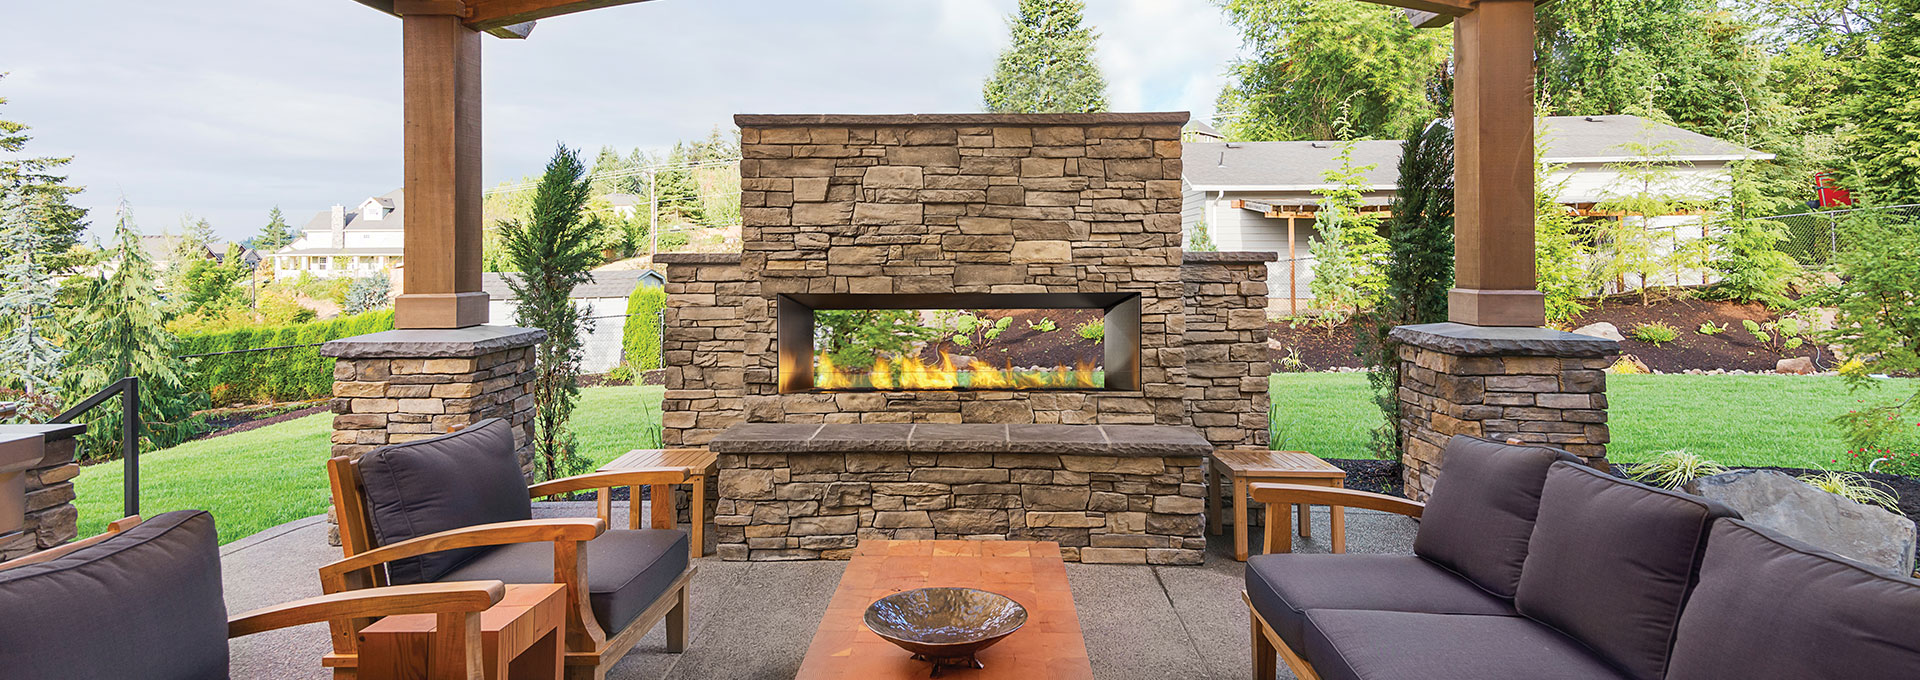 Outdoor Gas Fireplaces Outdoor Firepits Outdoor Firetables